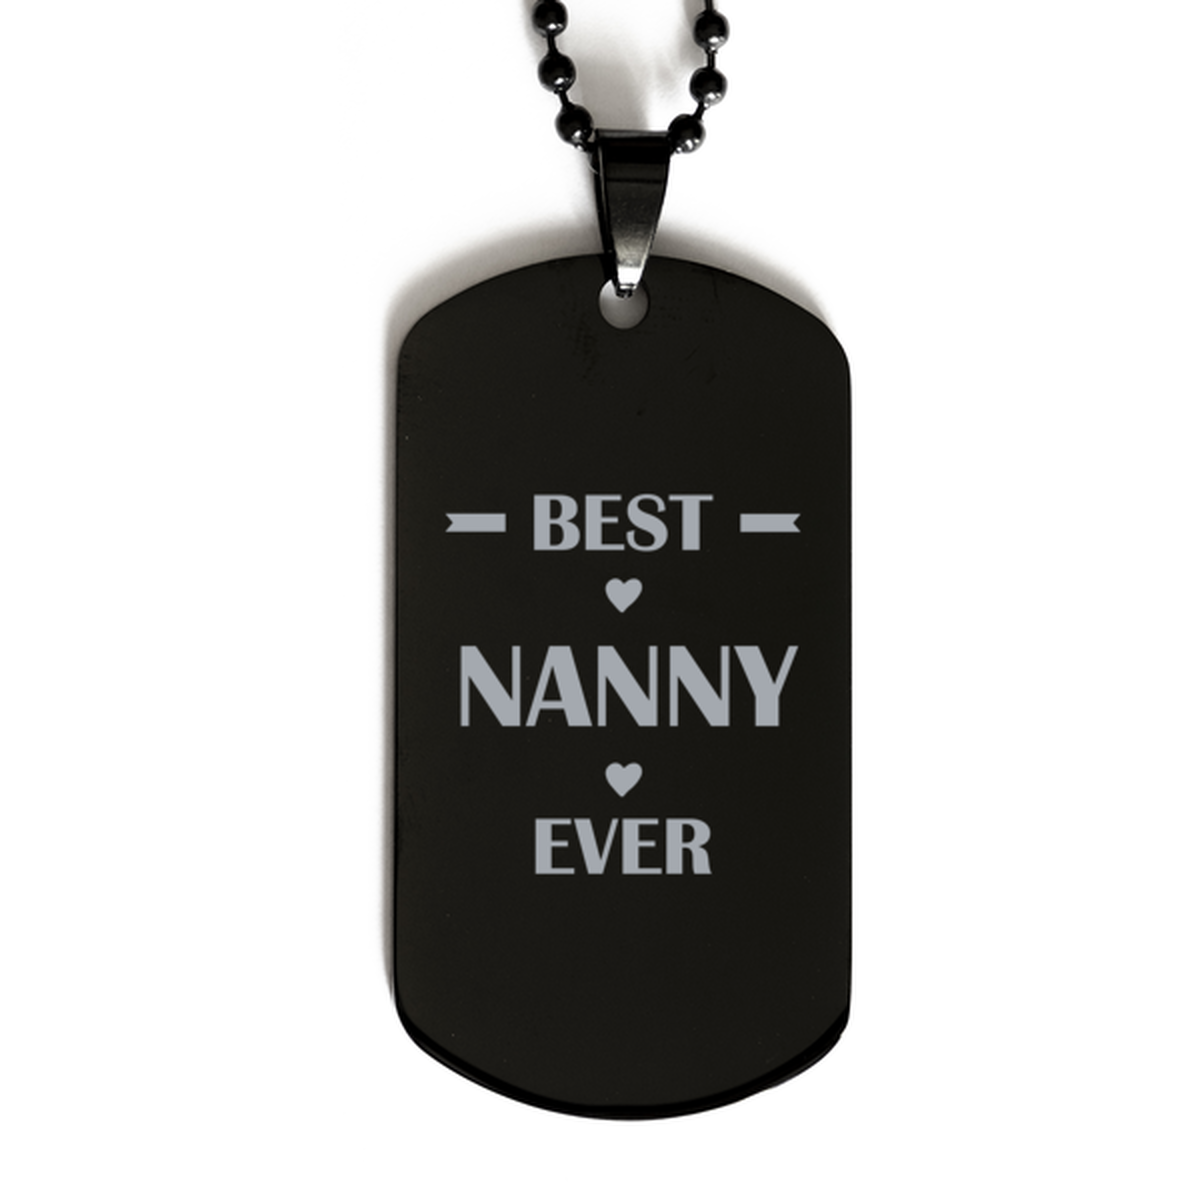 Best Nanny Ever Nanny Gifts, Funny Black Dog Tag For Nanny, Birthday Family Presents Engraved Necklace For Women